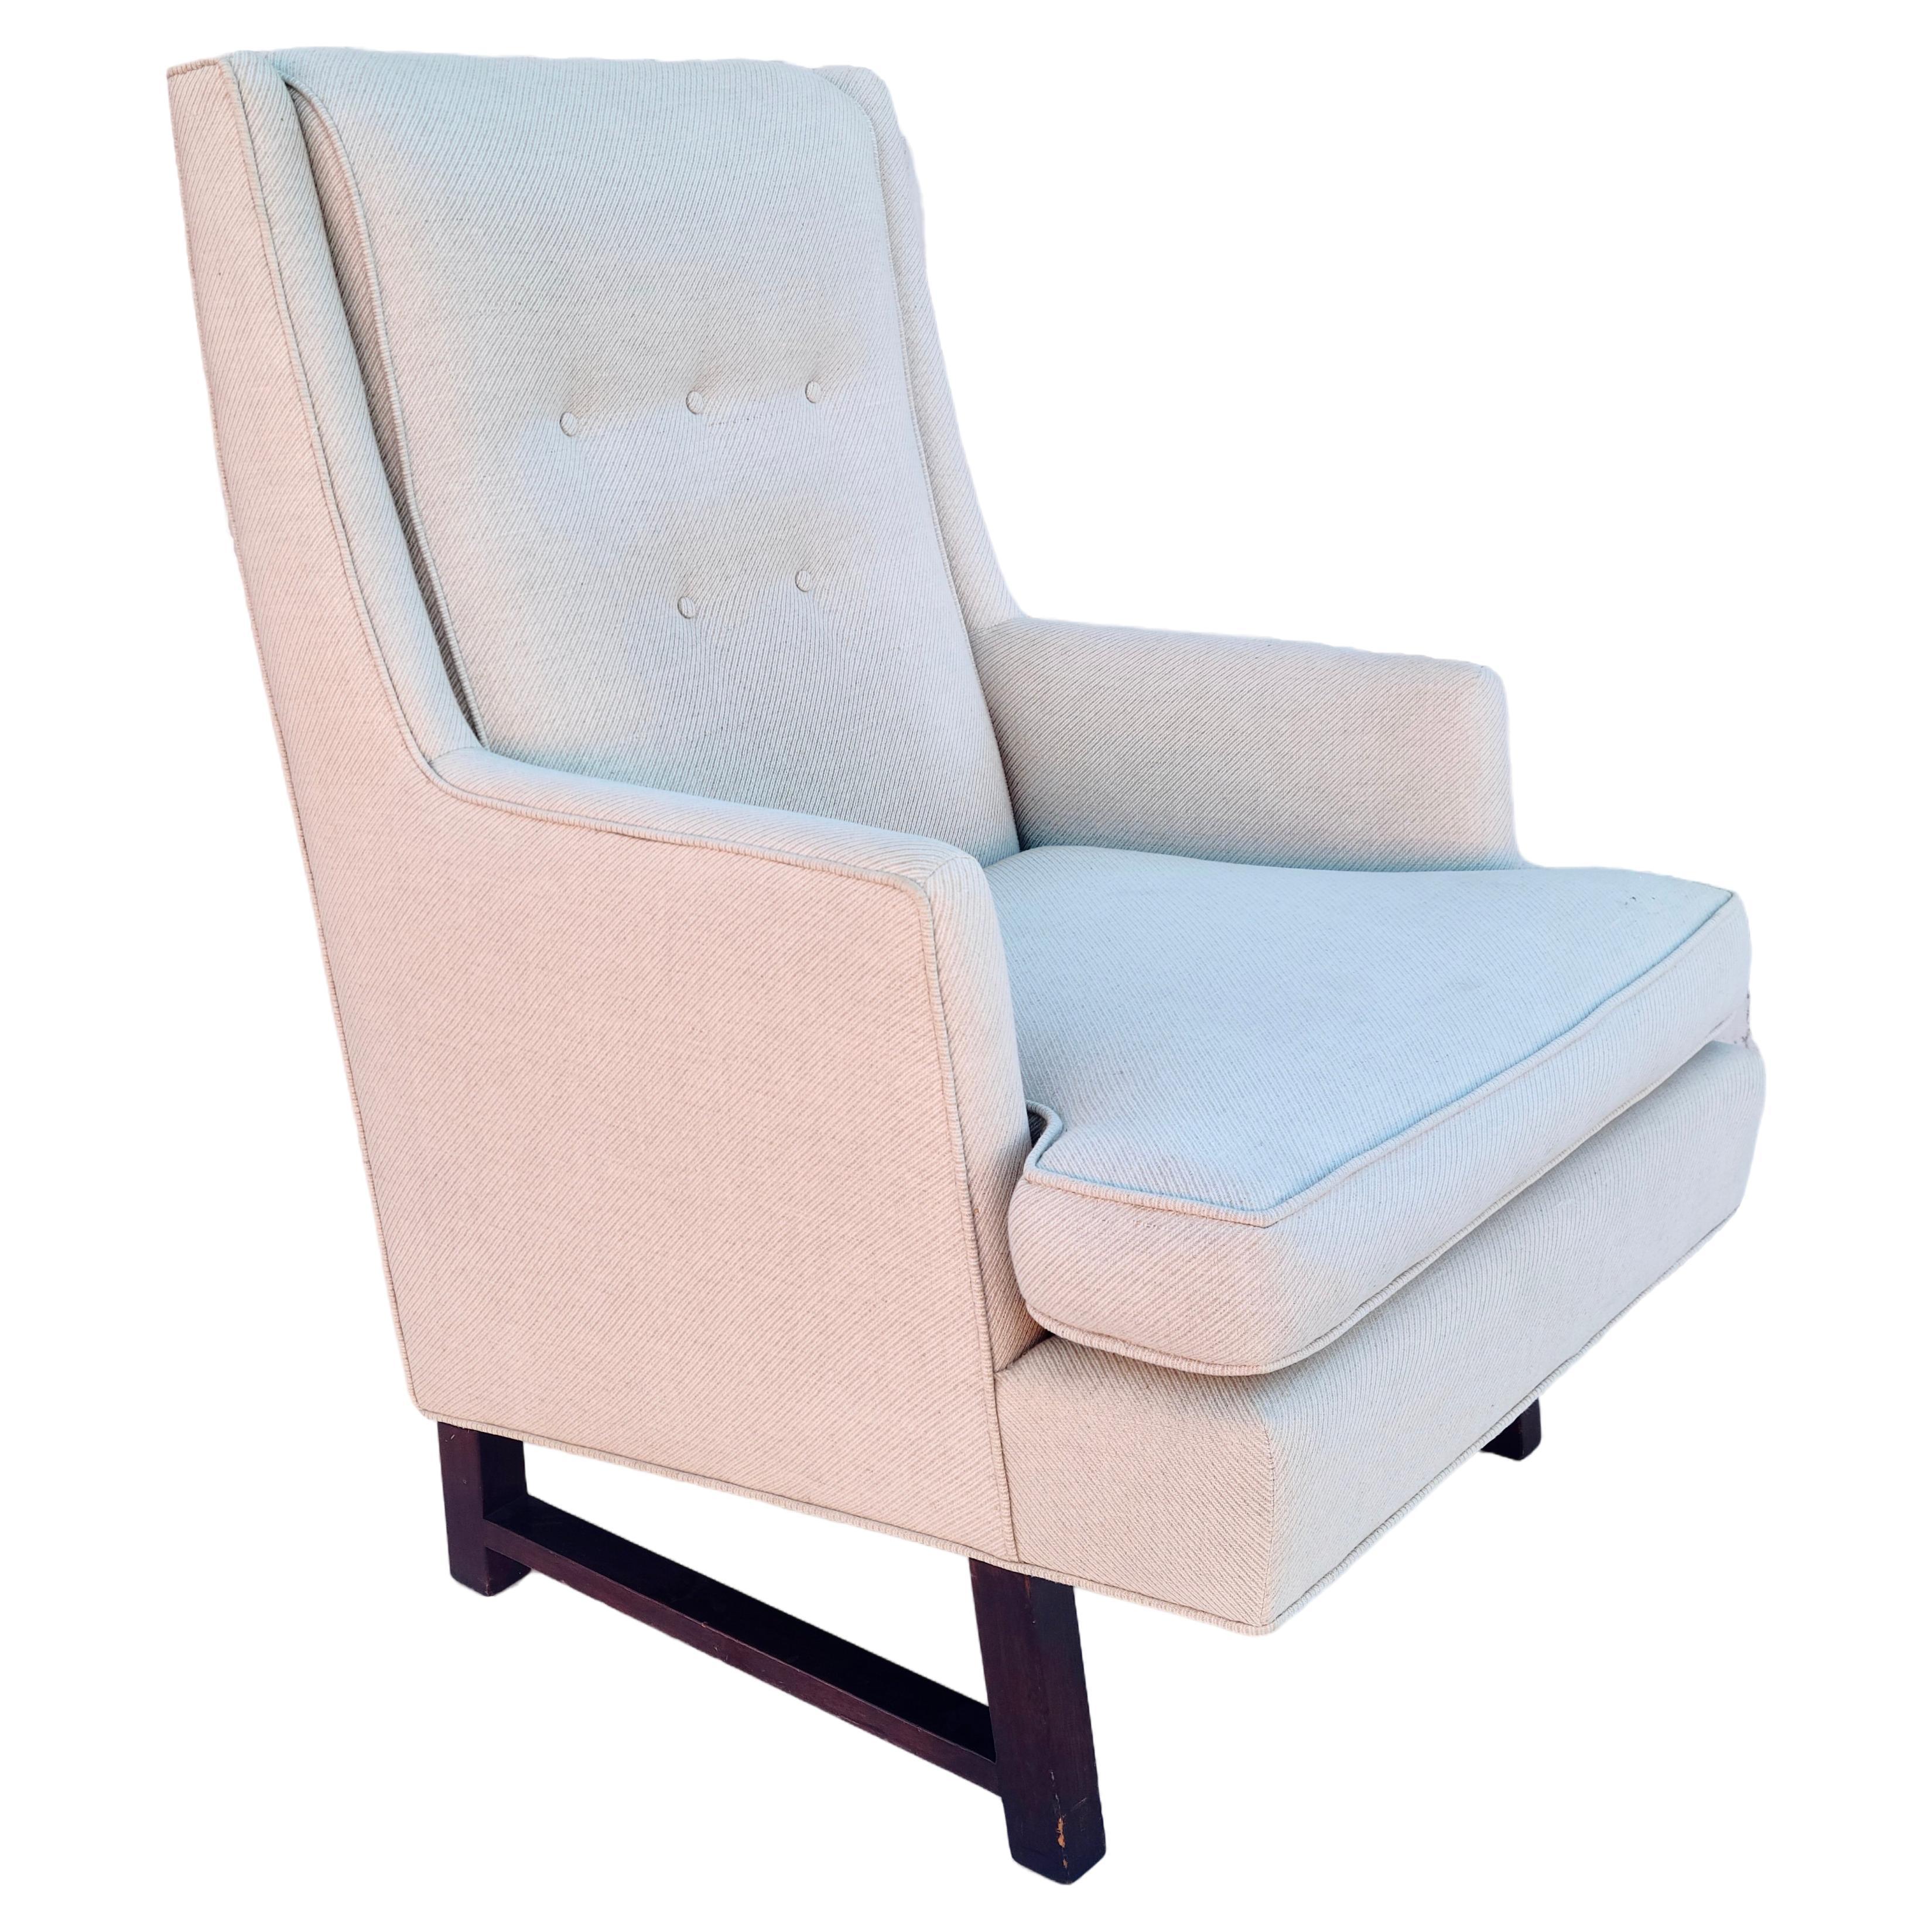 Mid-20th Century Dunbar Lounge Chair designed by Edward Wormley For Sale